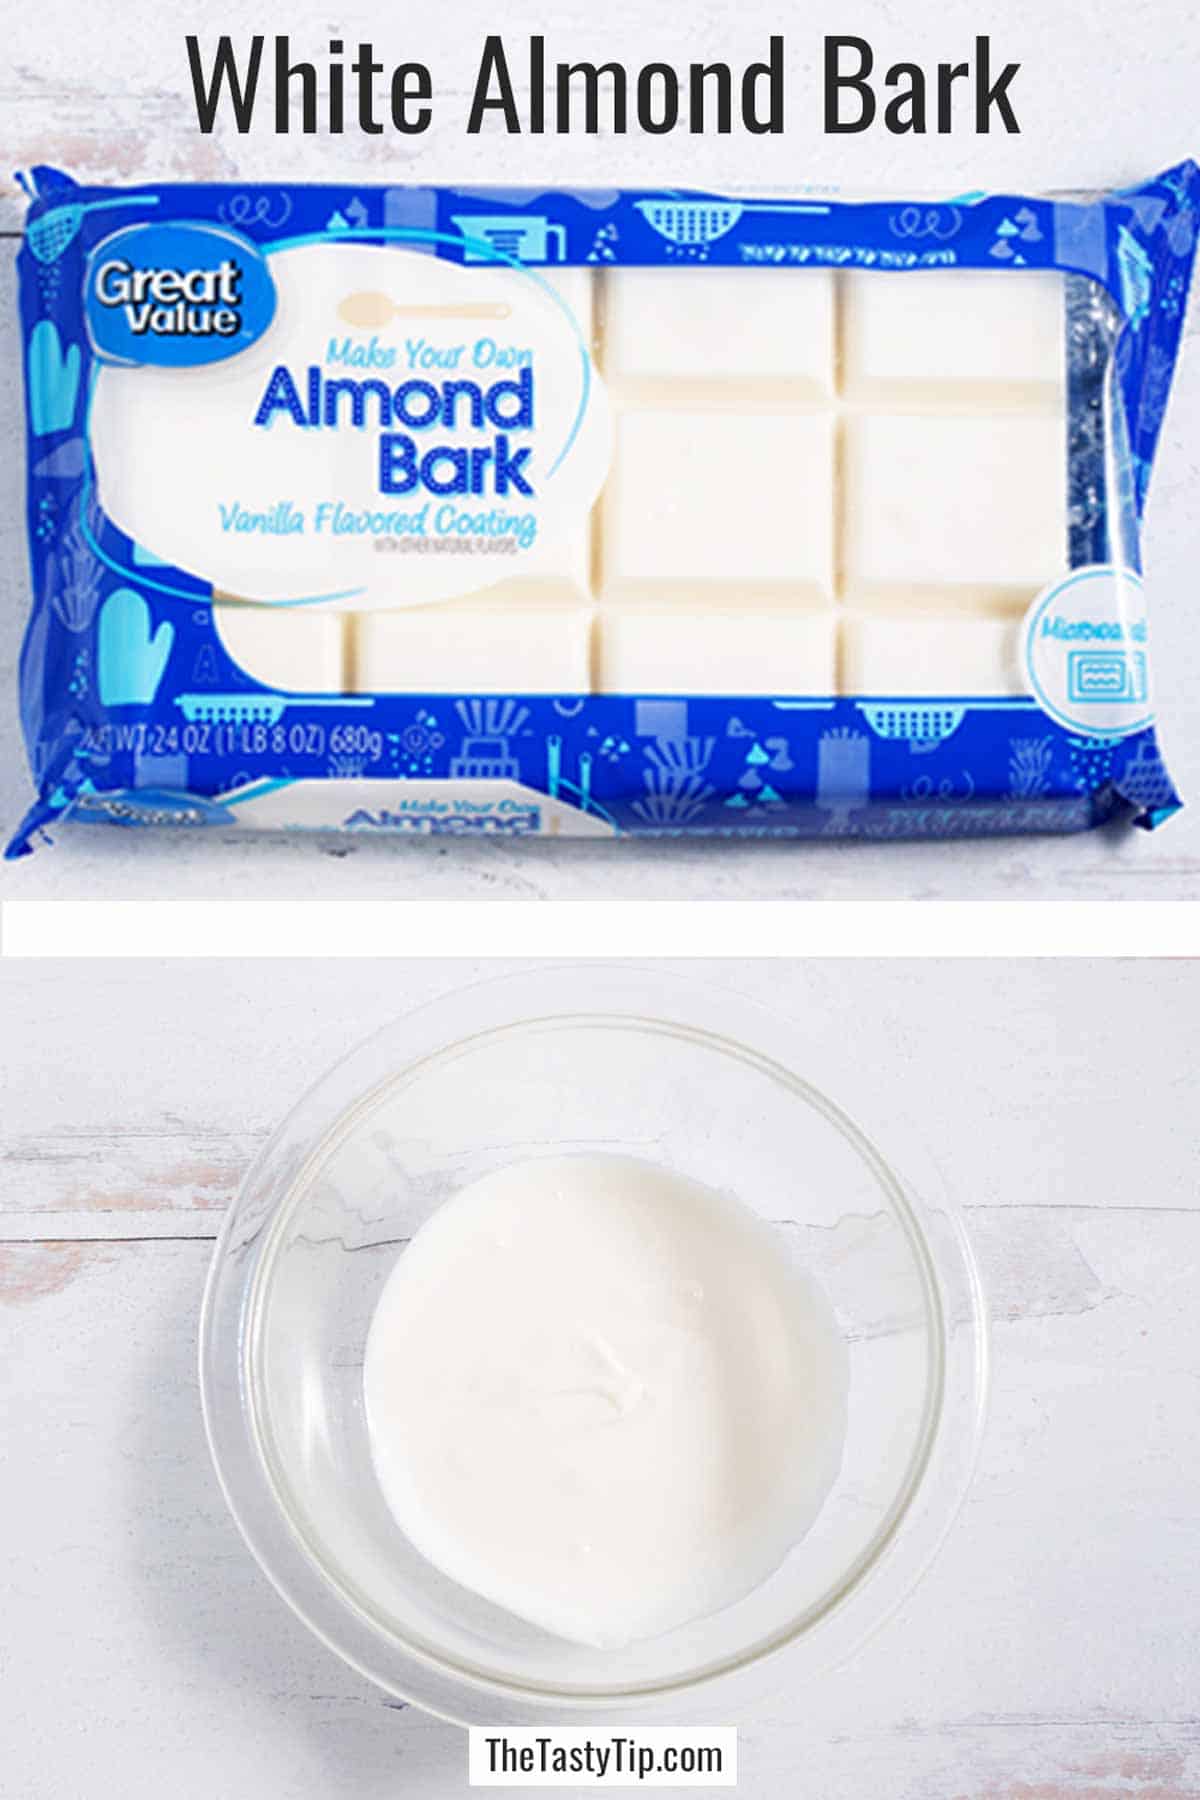 Package of almond bark vanilla flavored coating and a bowl of it melted.